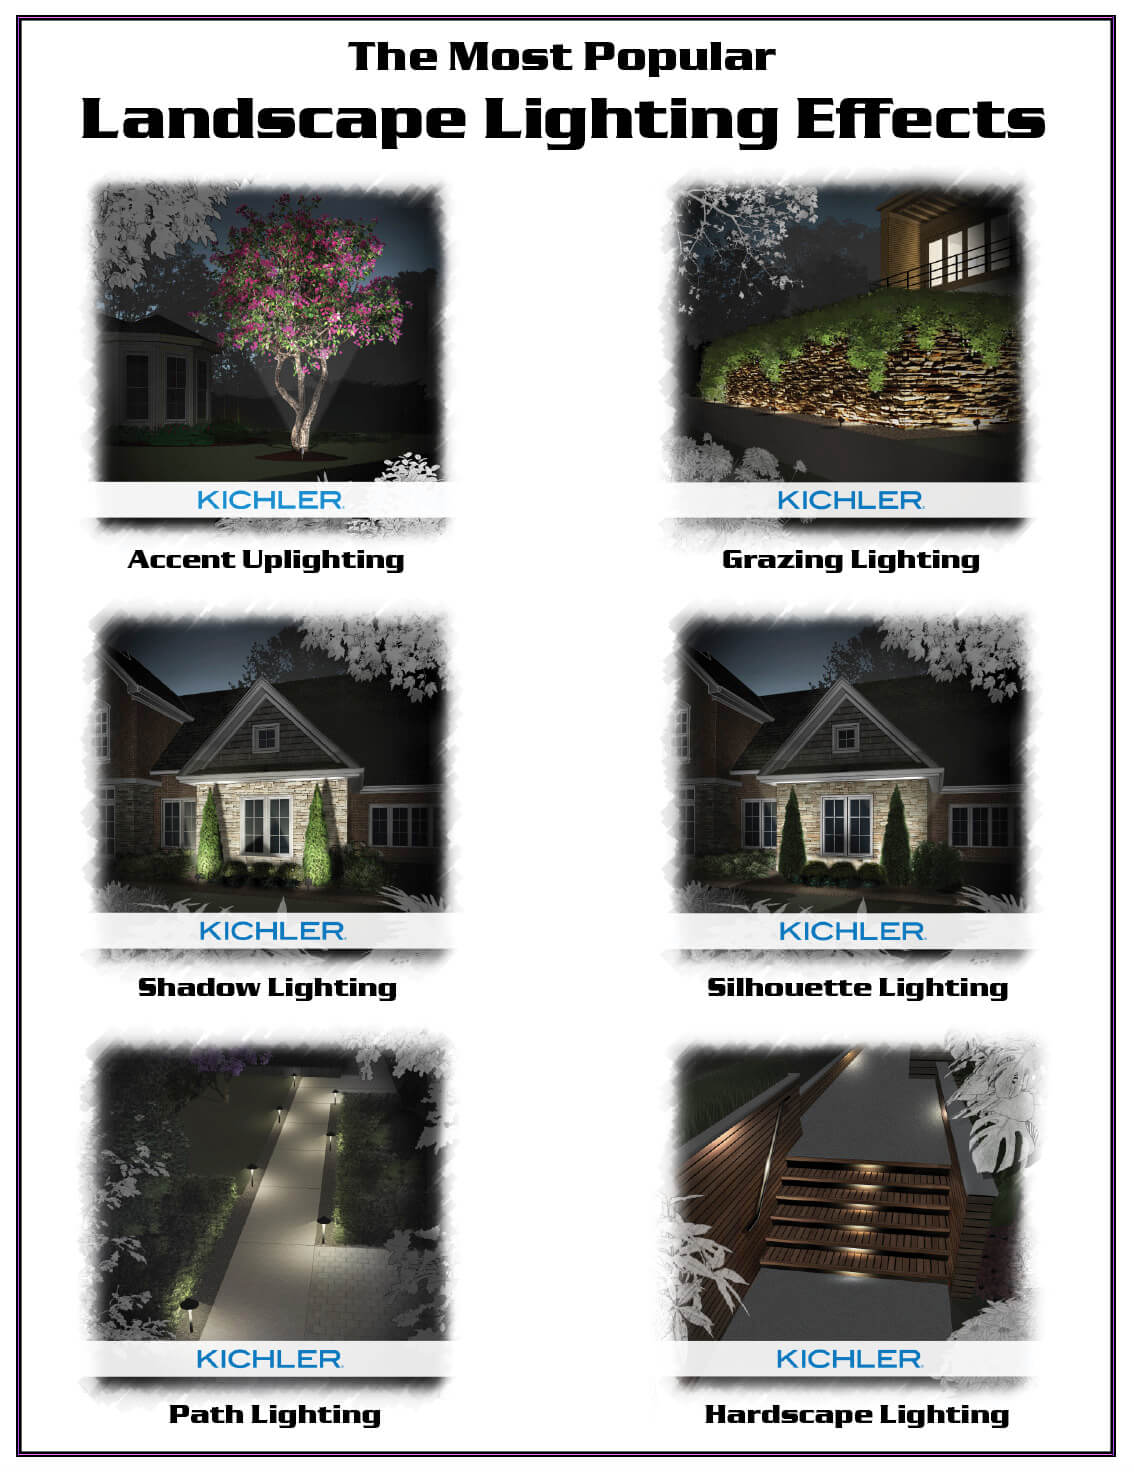 A guide to popular landscape lighting effects